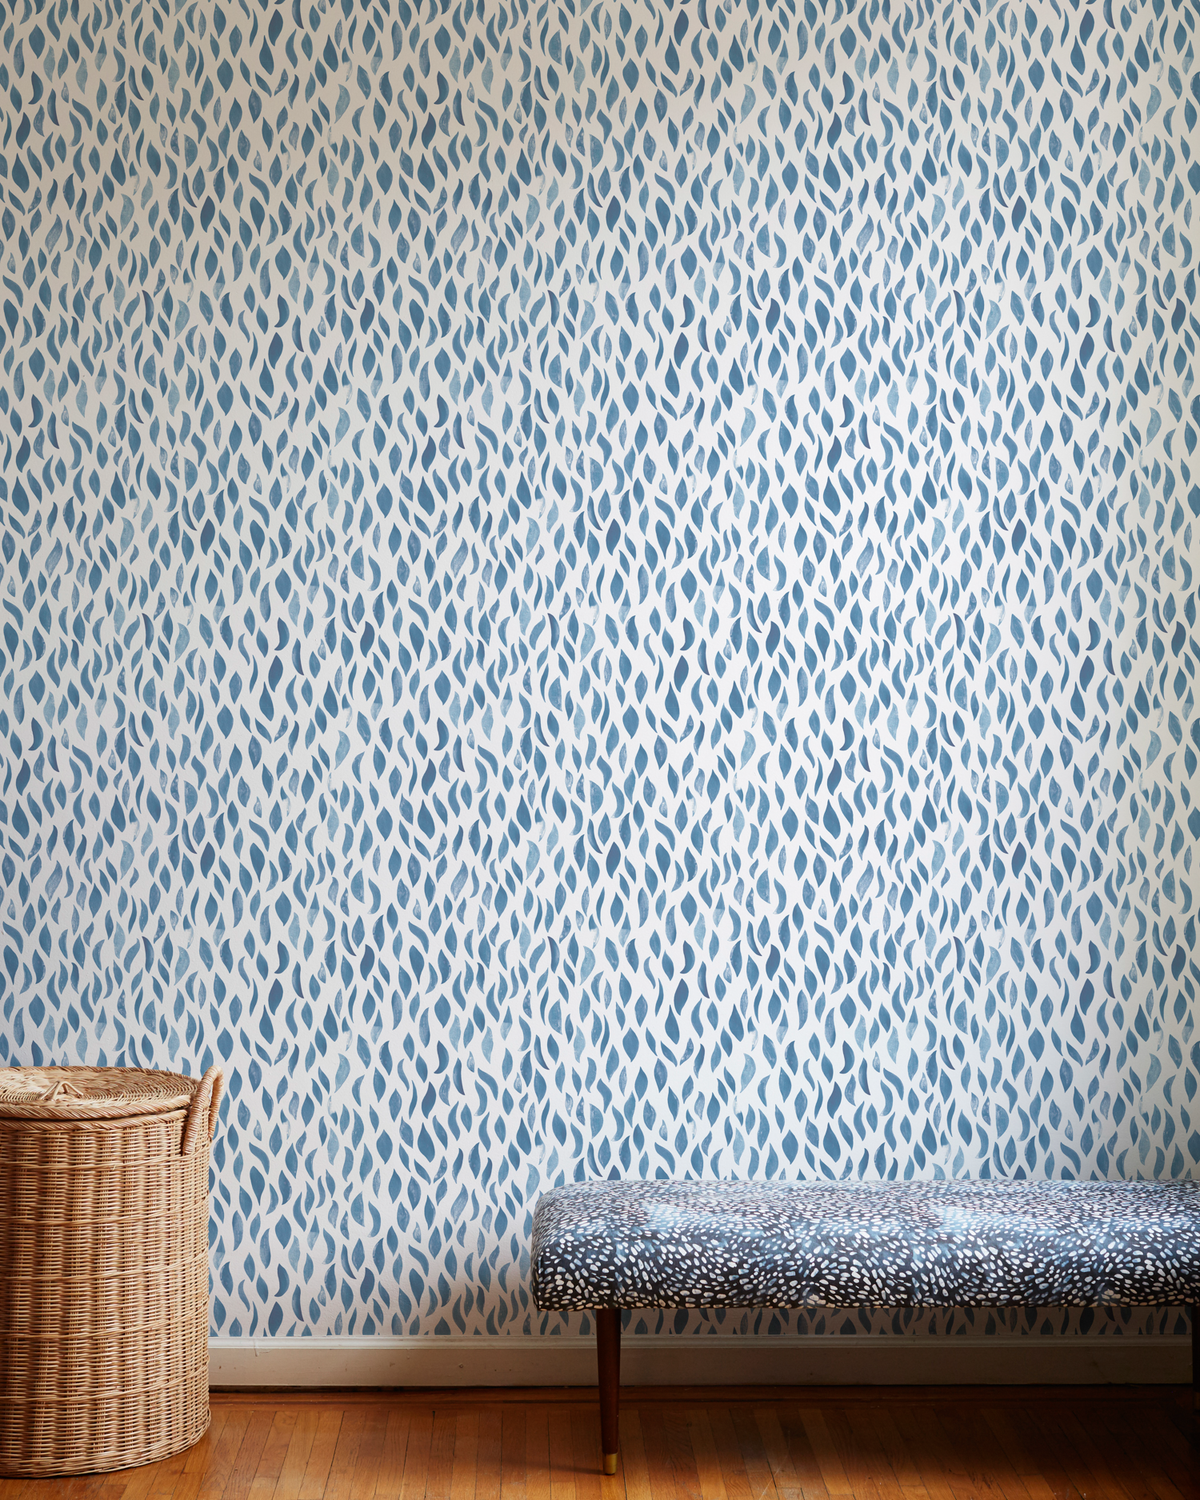 I Mimic the Wallpaper & Do a DIY Brushstroke Accent Wall